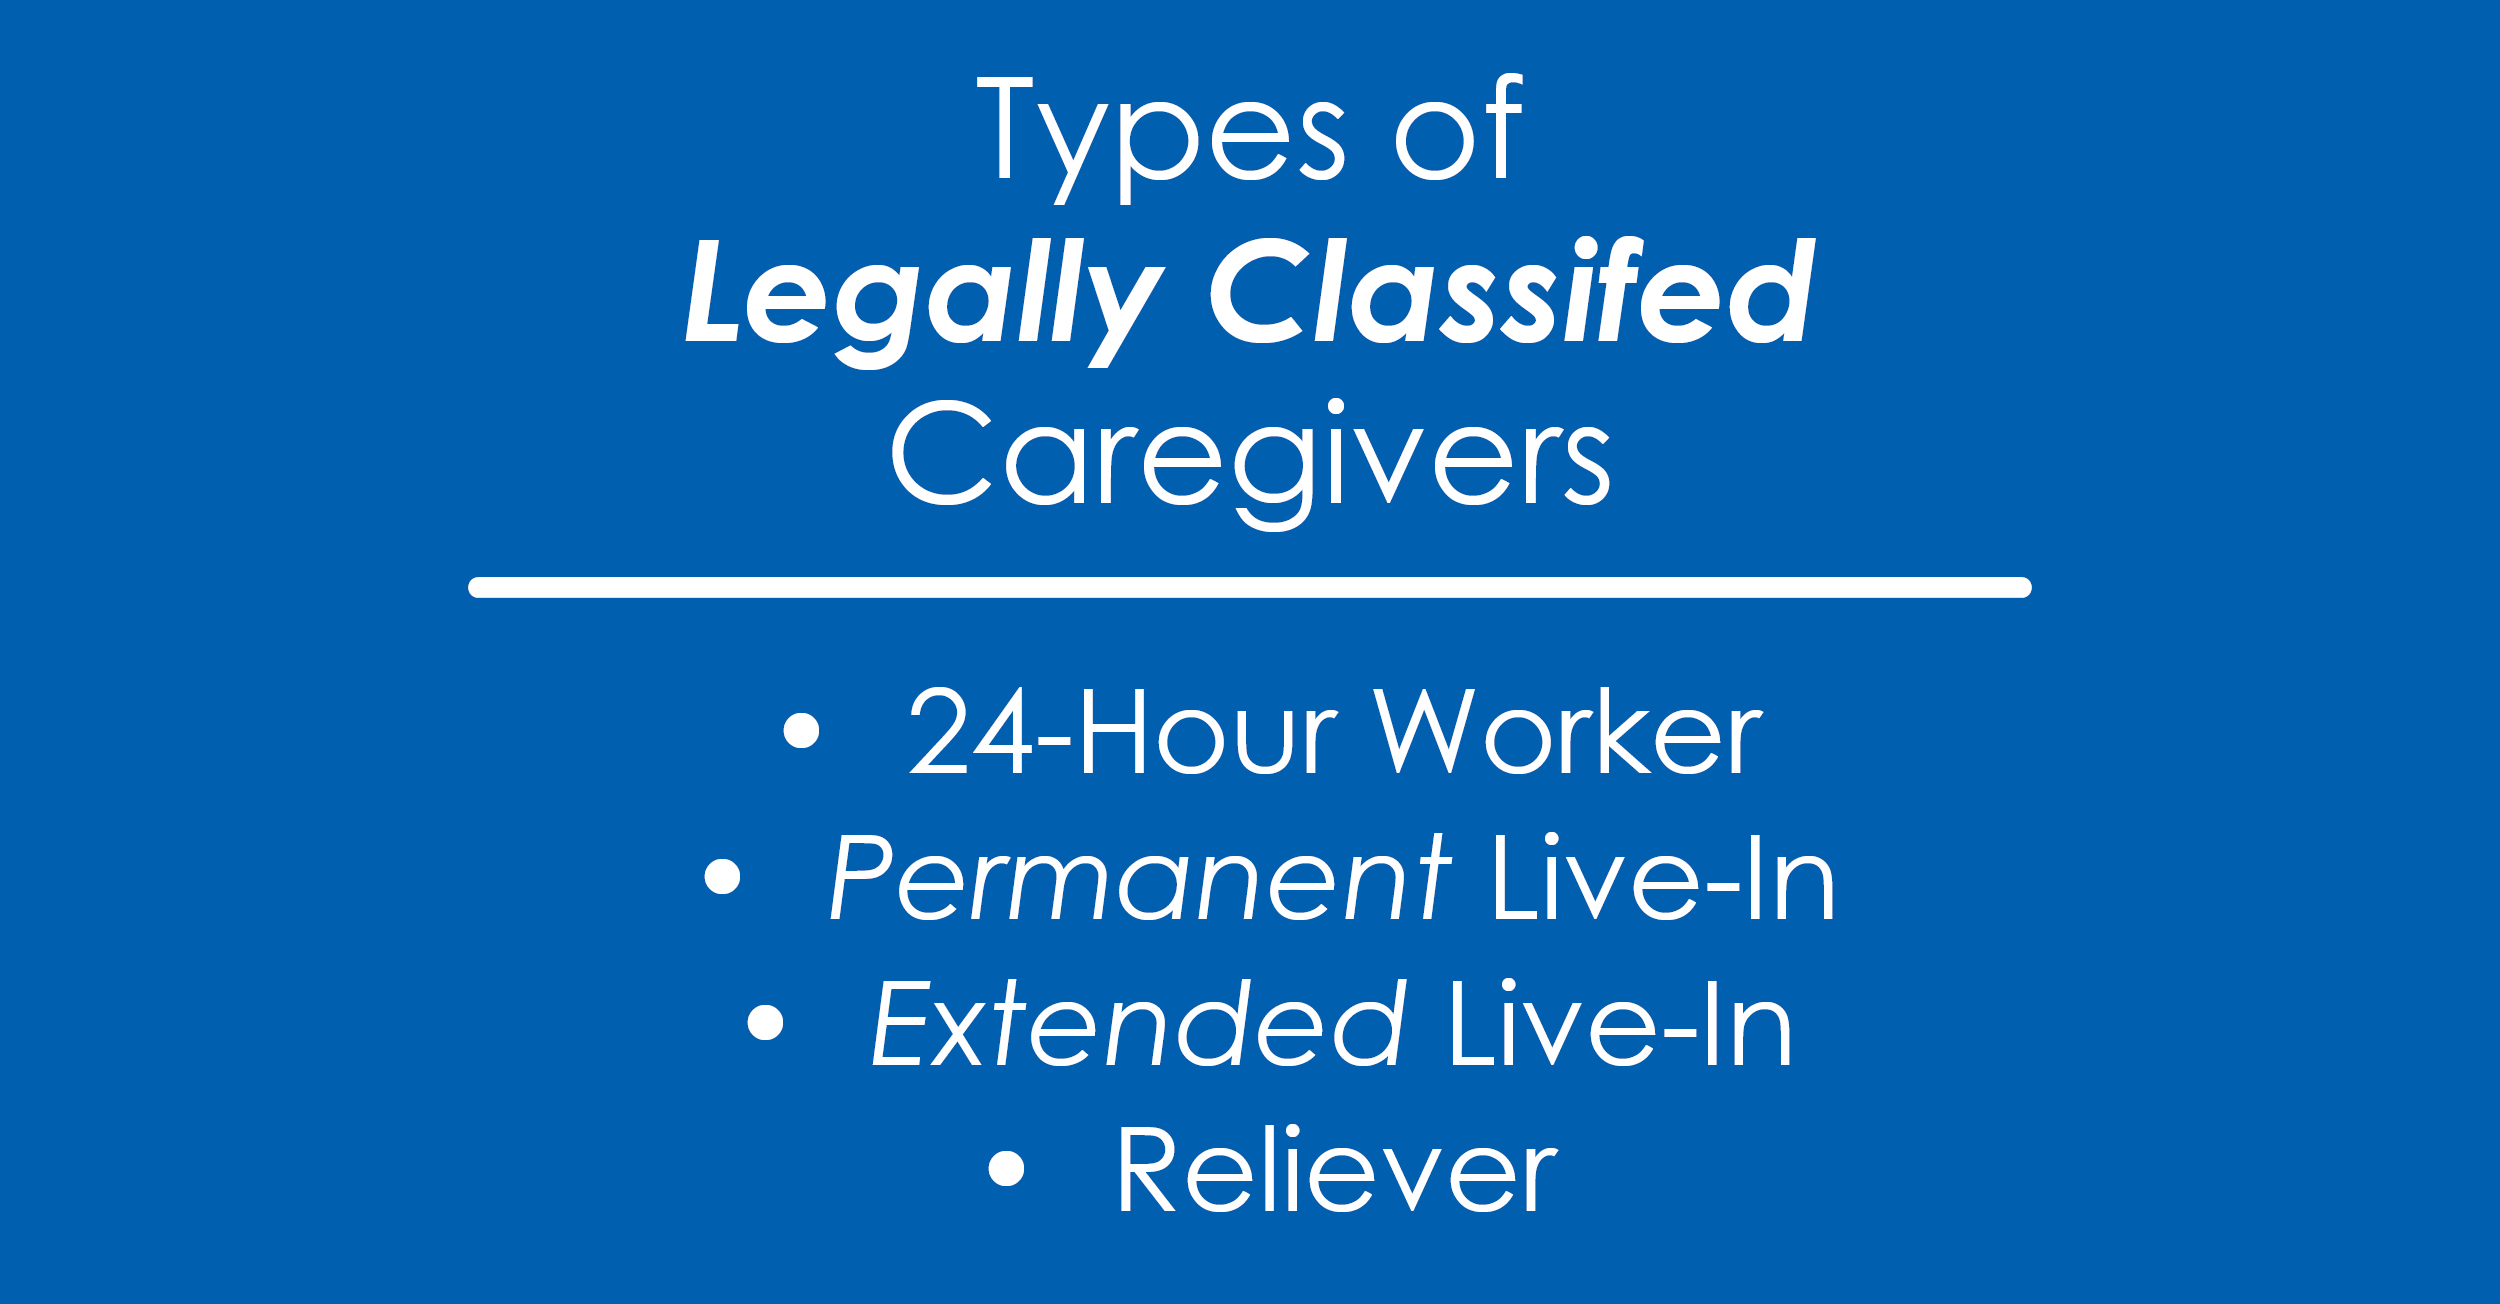 Types of Legally Classified Caregivers